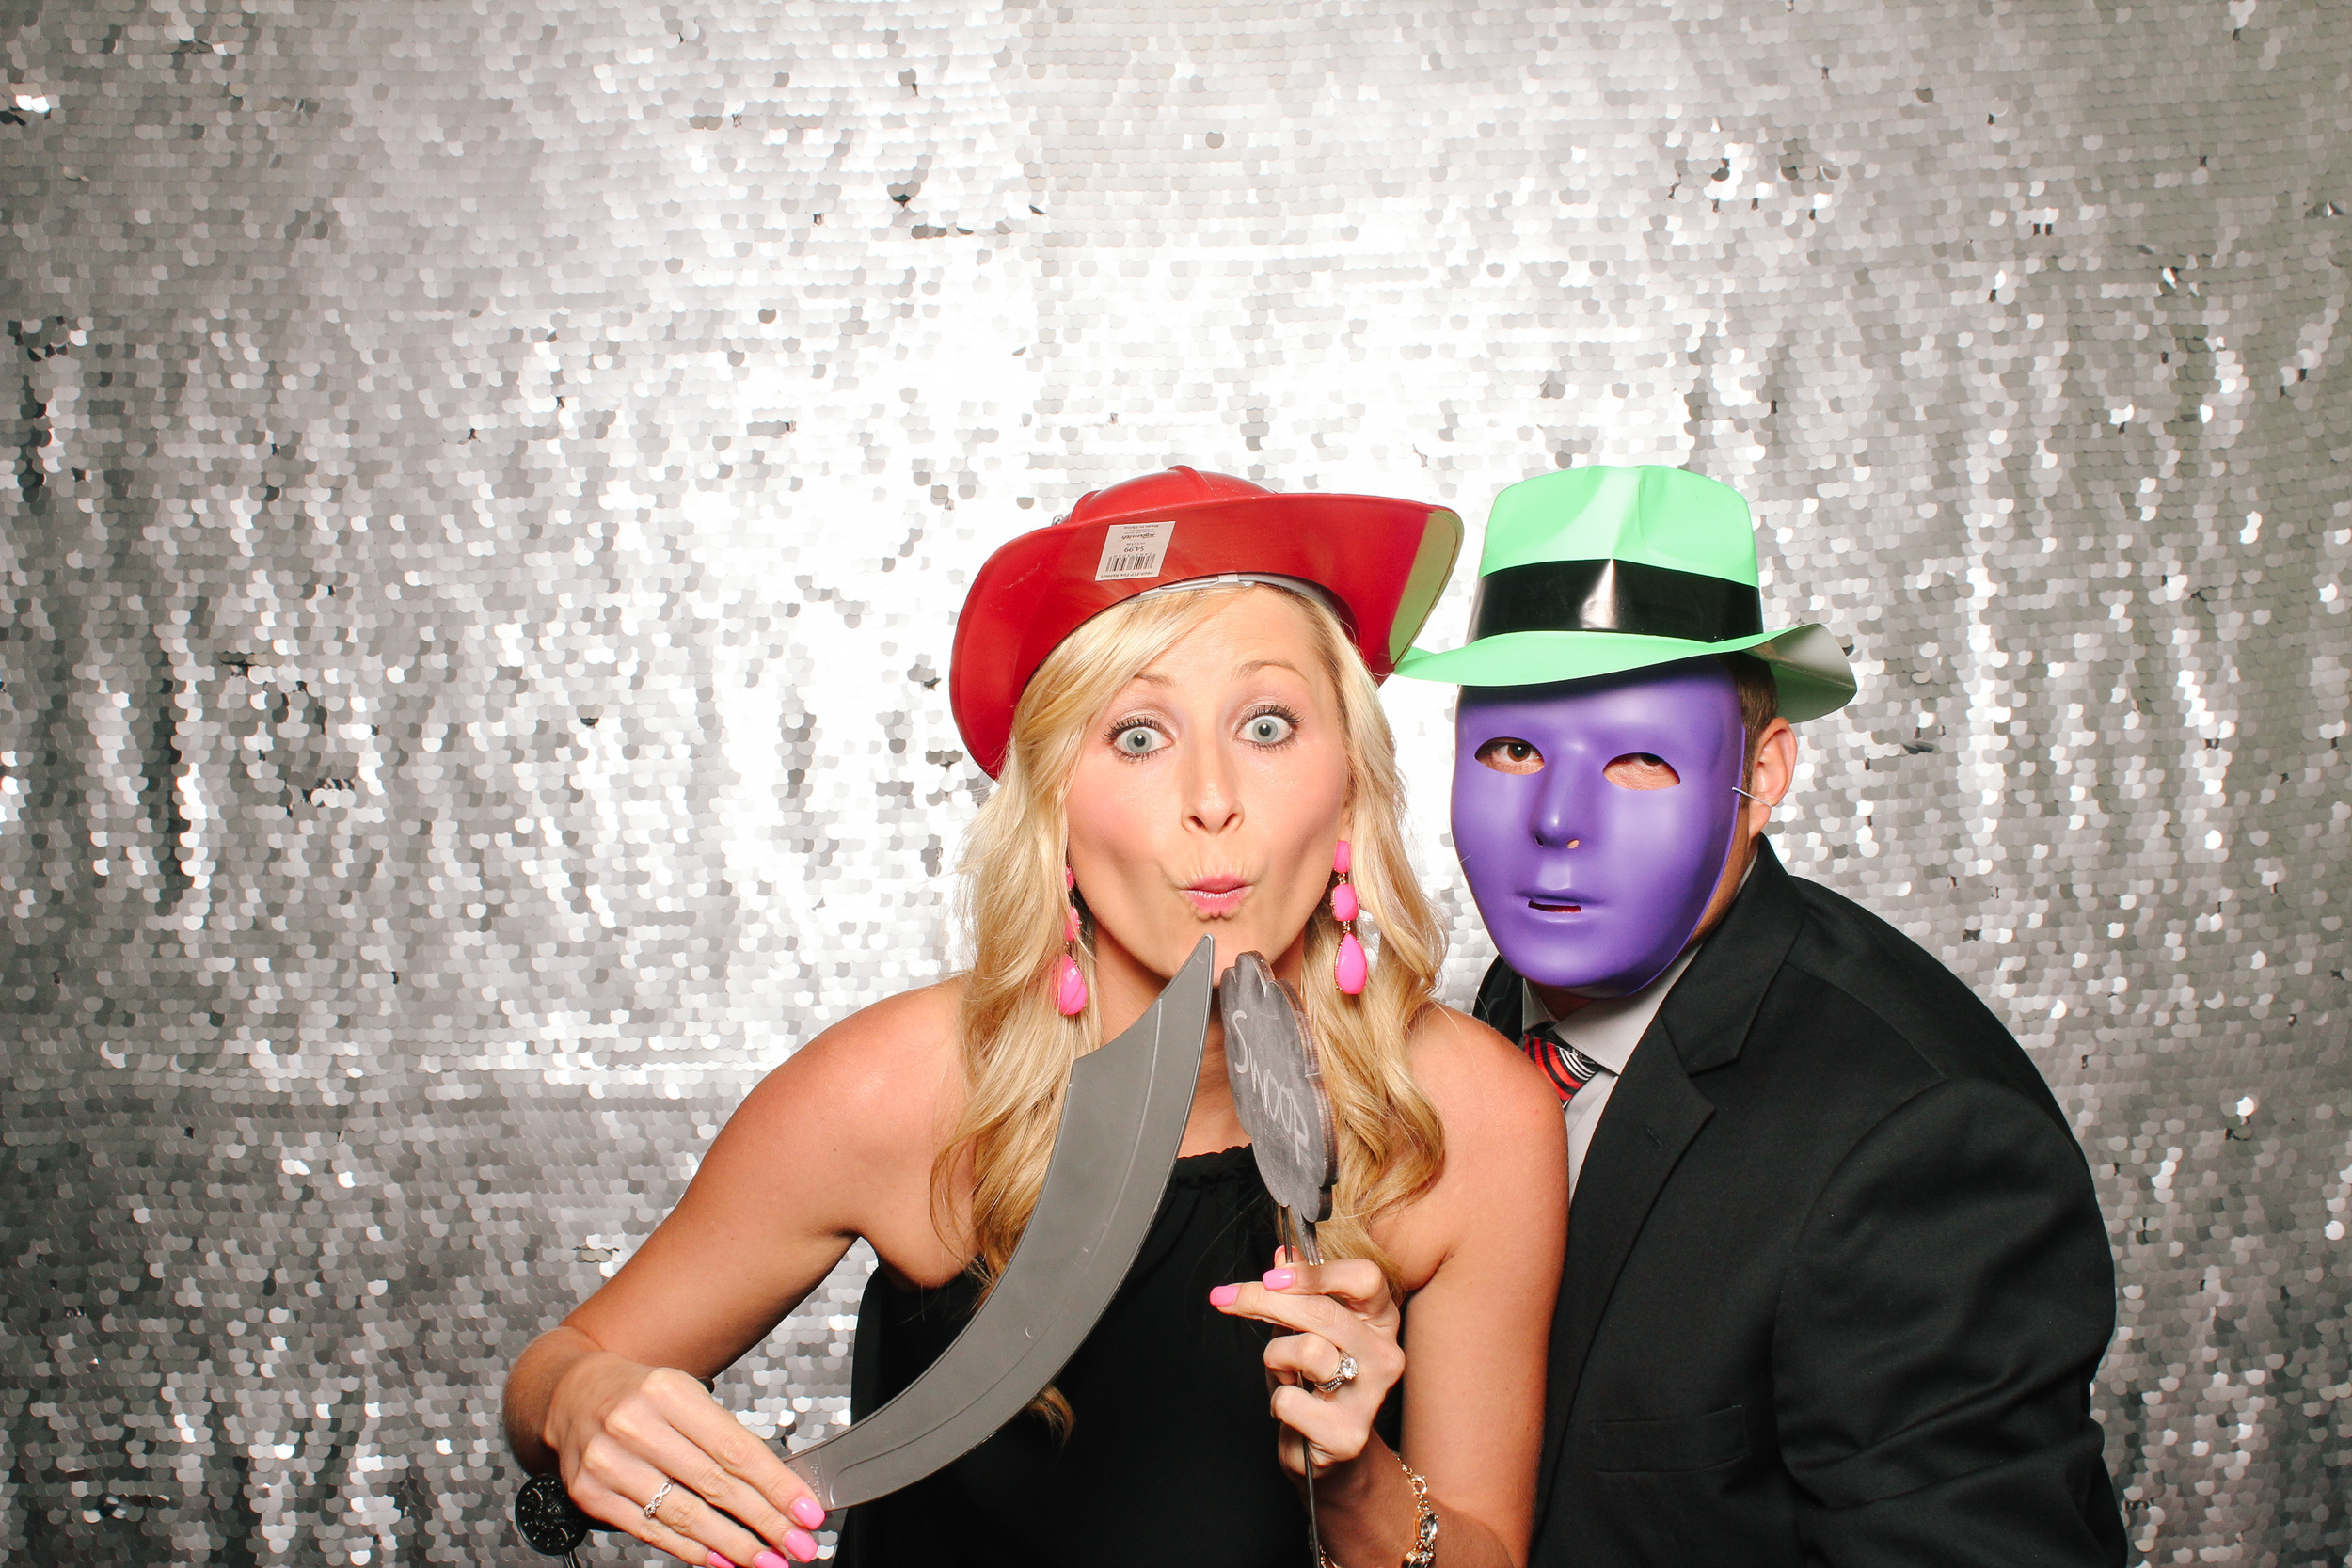 00049-Too Much Awesomeness Photo Booth in Cleveland-20150606.jpg